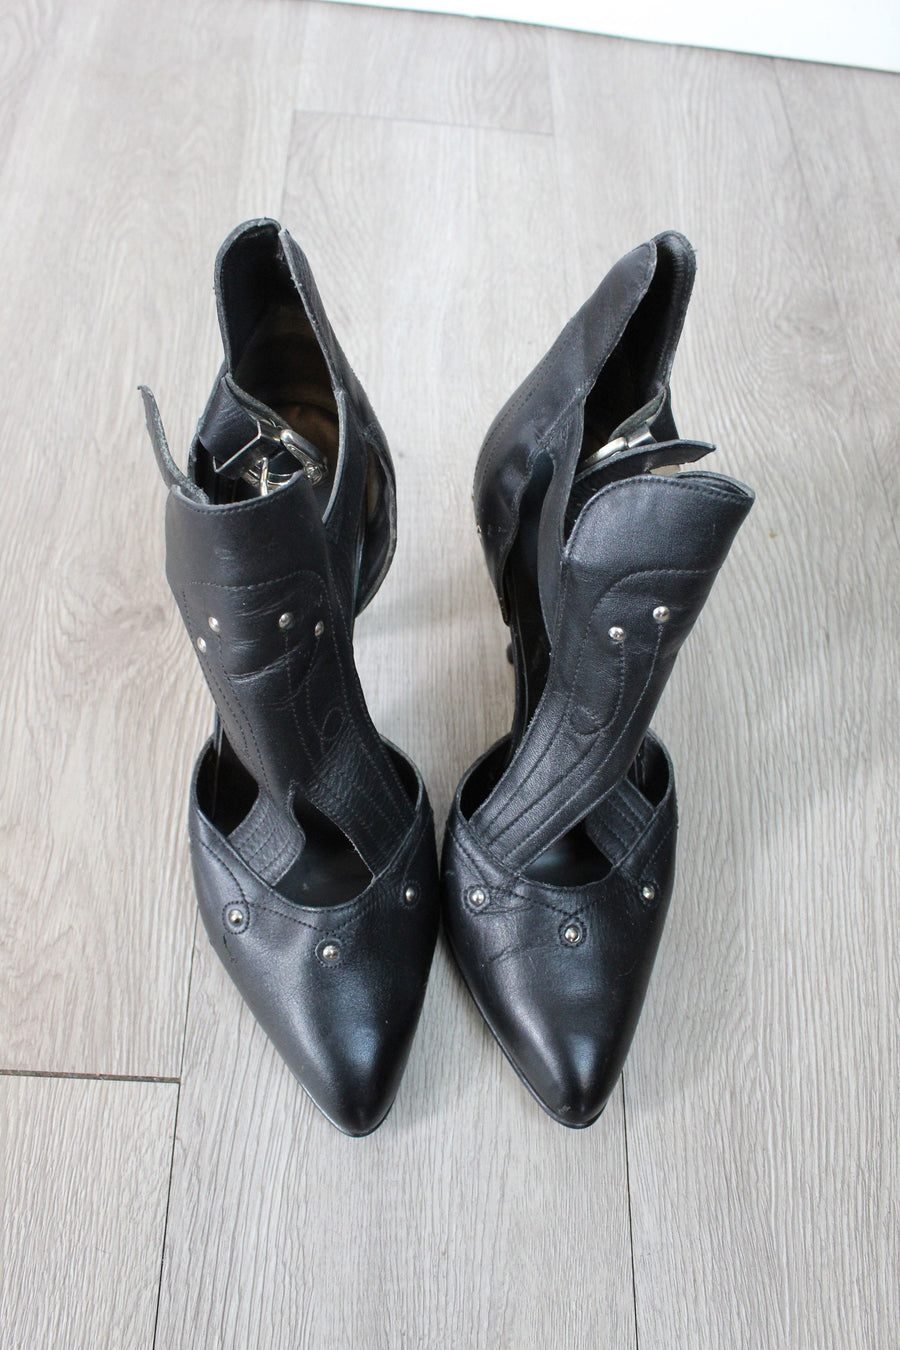 1980s RUSH HOUR STUDDED shoes size 8.5 us | new spring